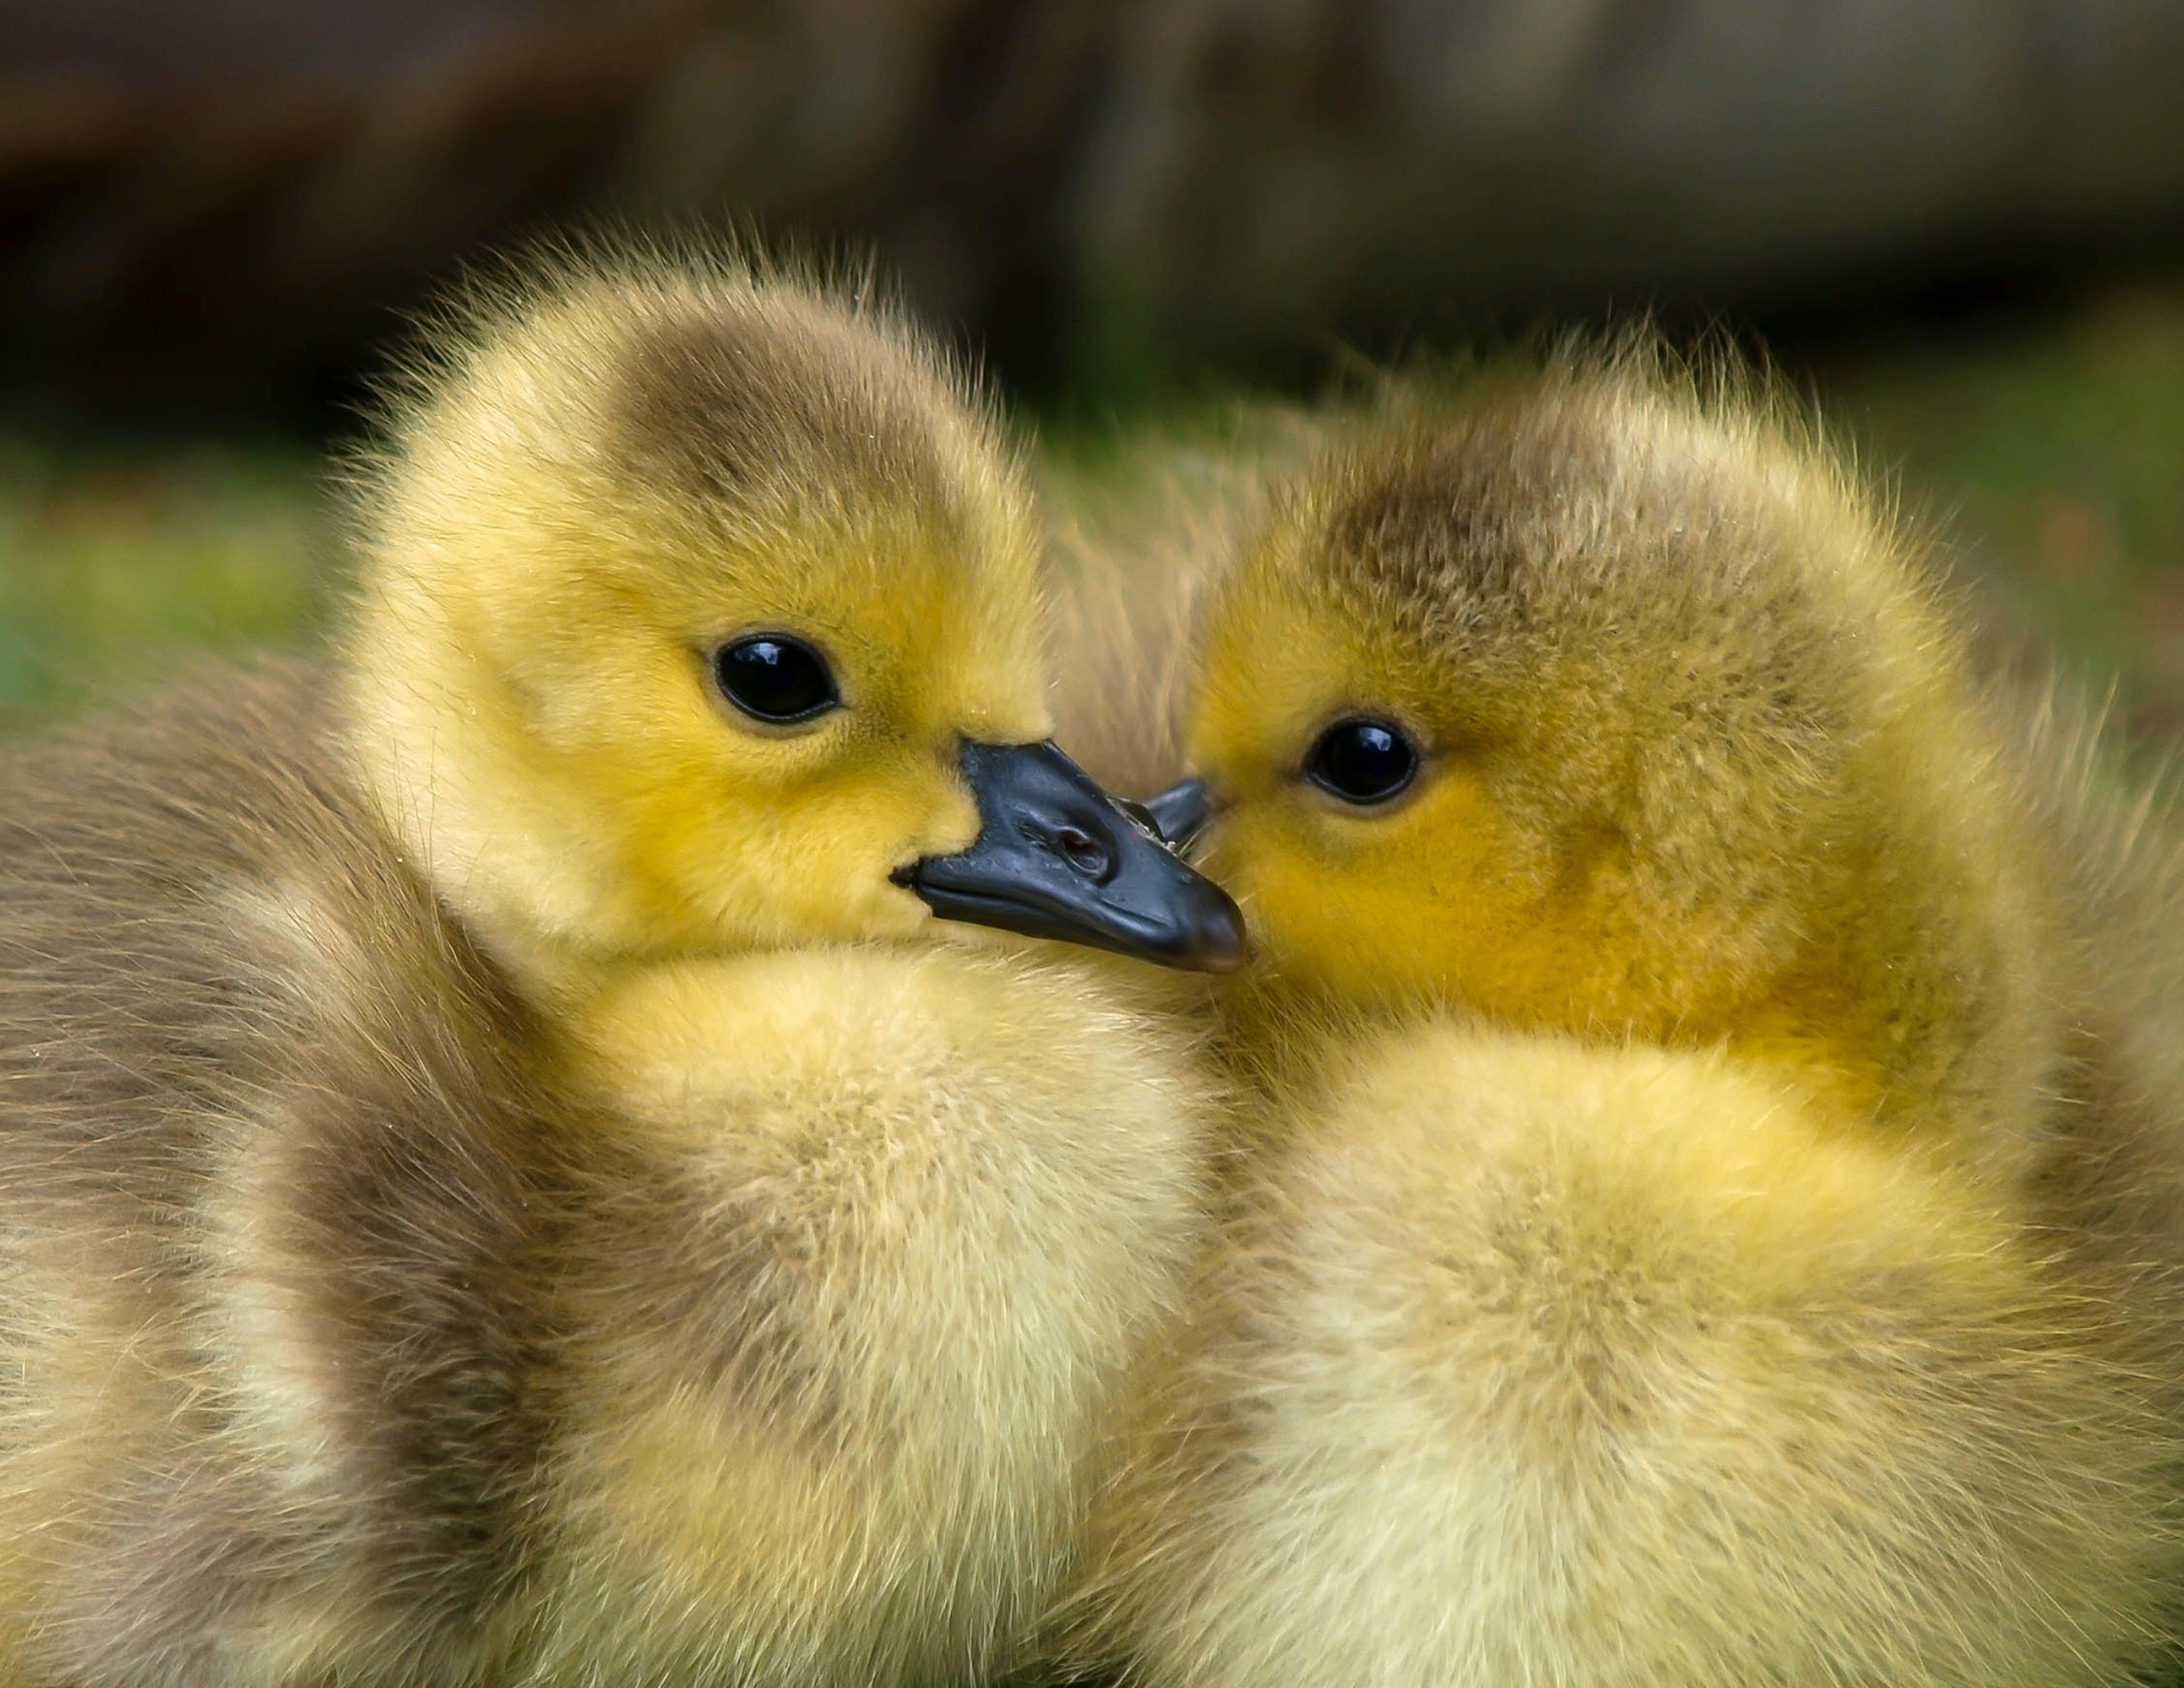 Yellow Ducklings Closeup Photography · Free